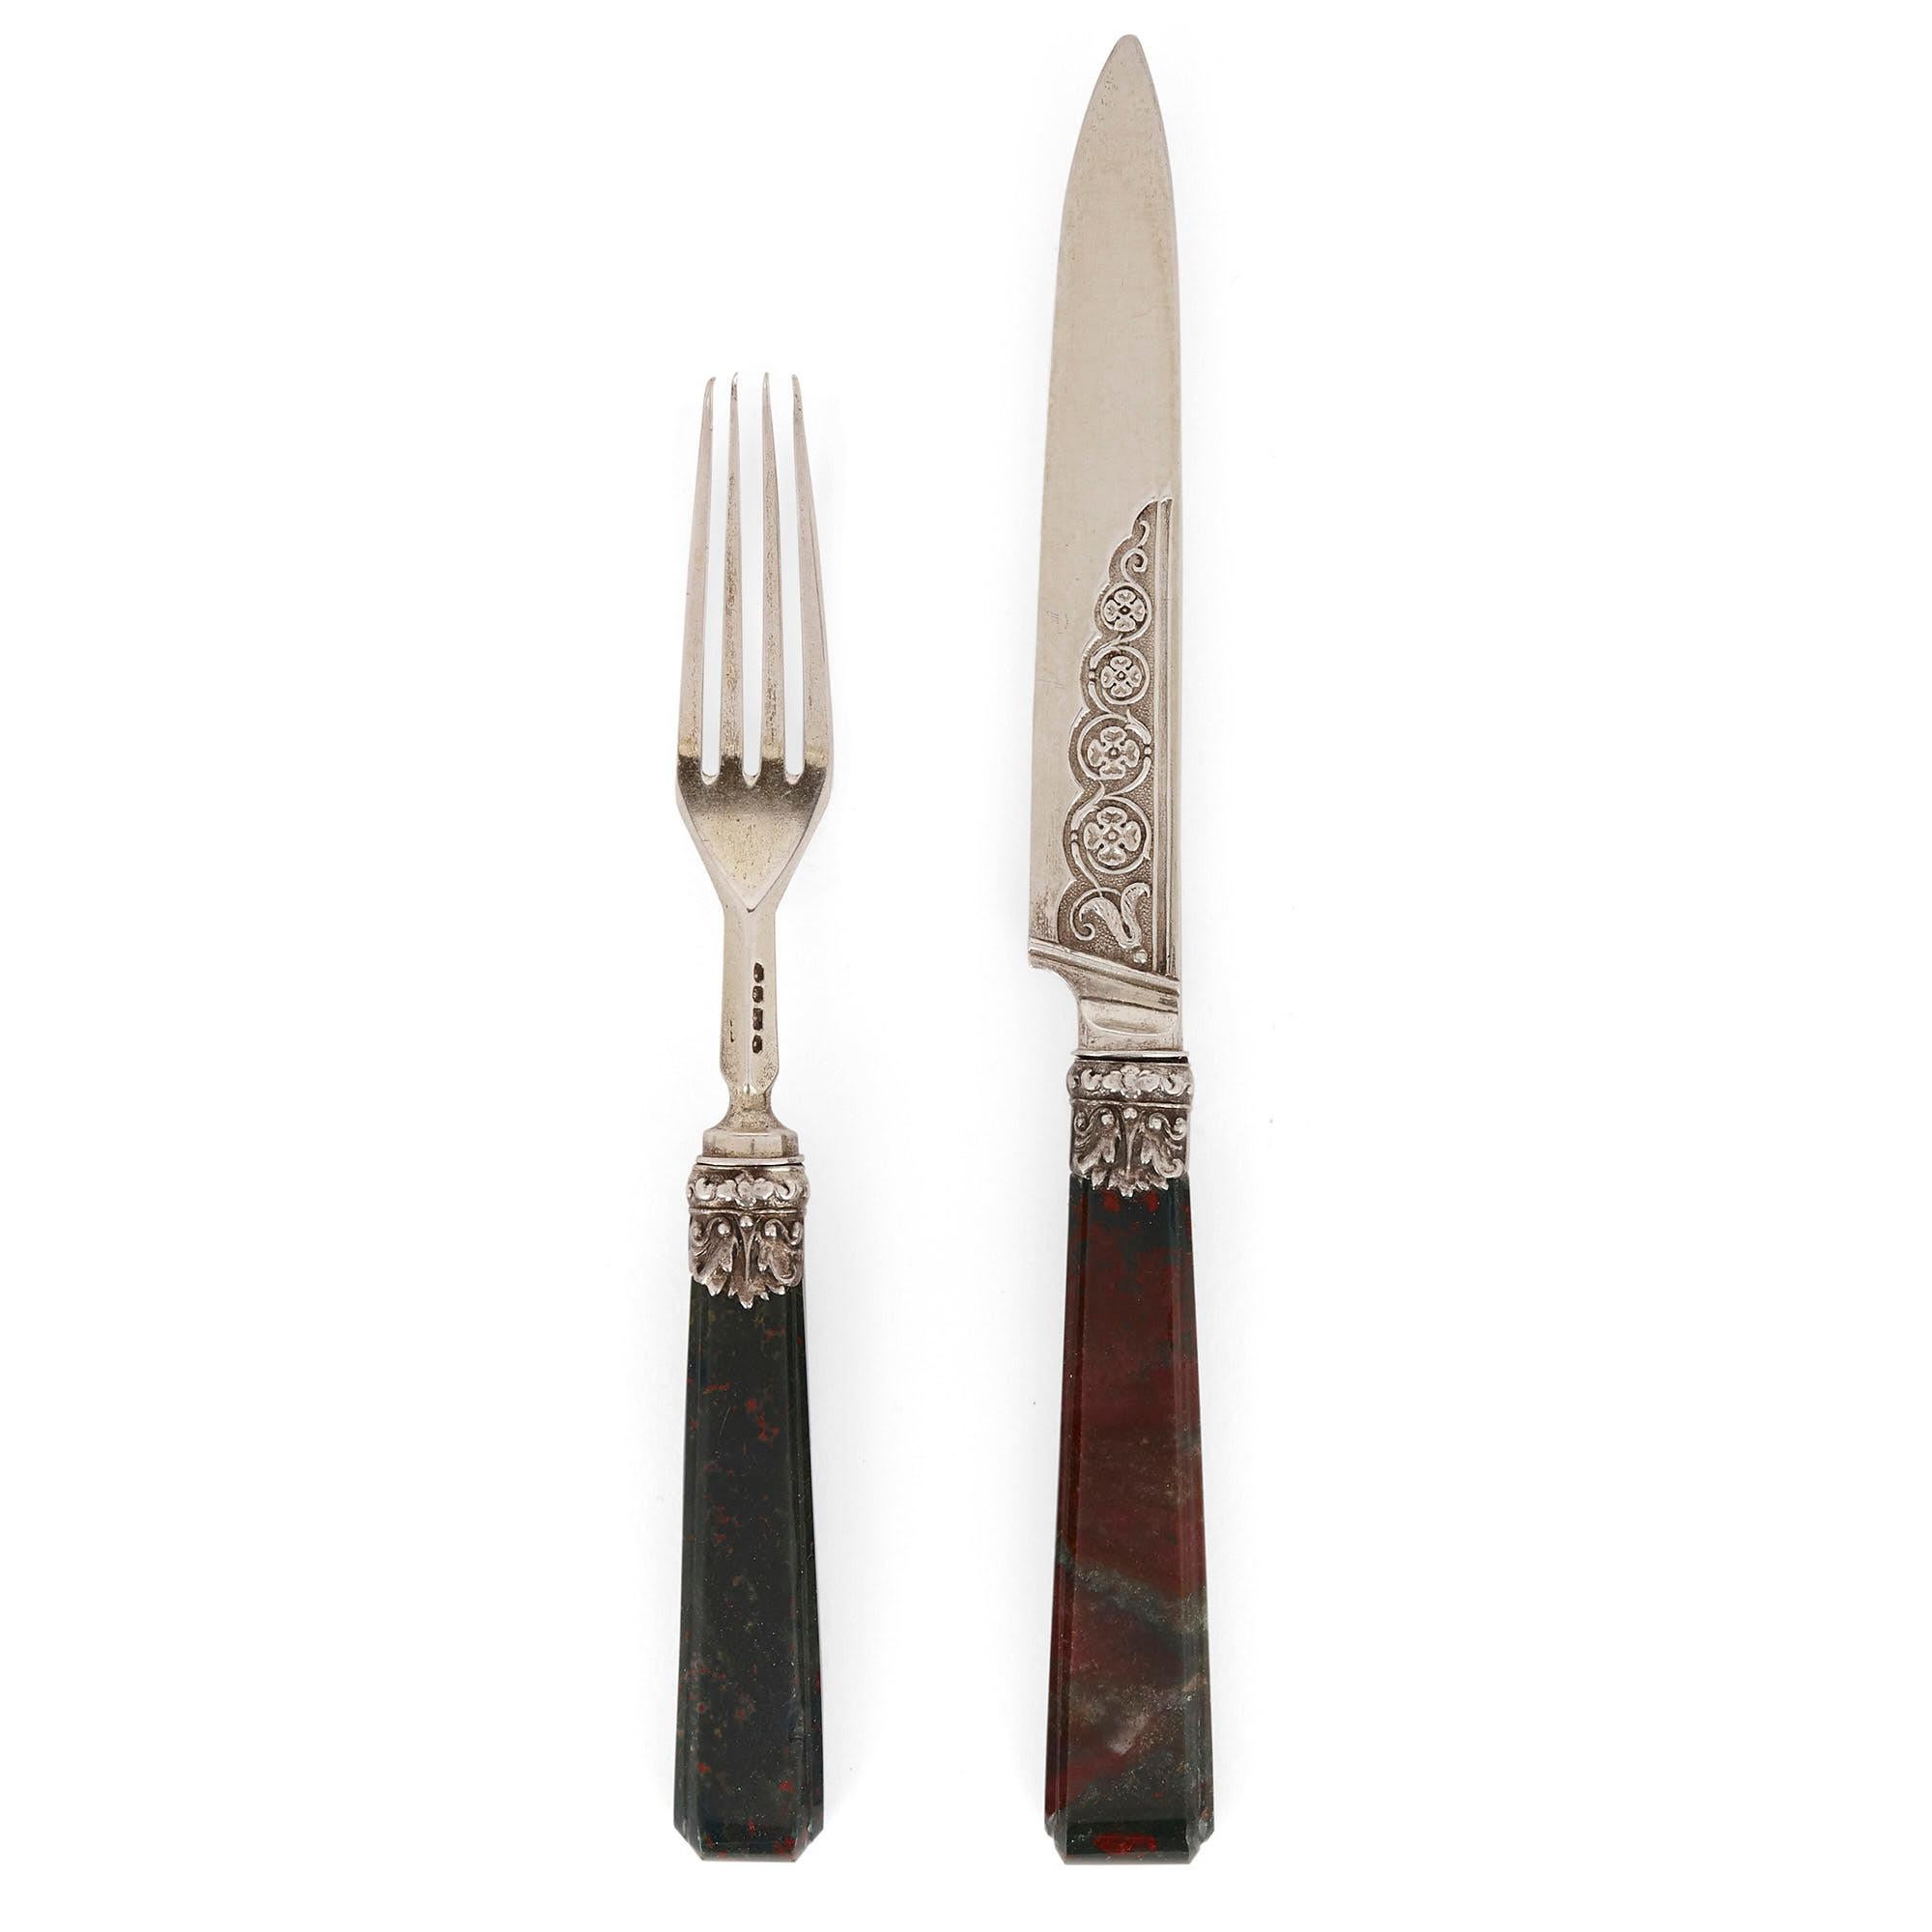 Important English silver flatware service by Francis Higgins II
English, 1840
Knives: Height 20cm, width 2cm, depth 1cm
Forks: Height 16.5cm, width 2cm, depth 1cm

This superb flatware service was crafted by the esteemed silversmith Francis